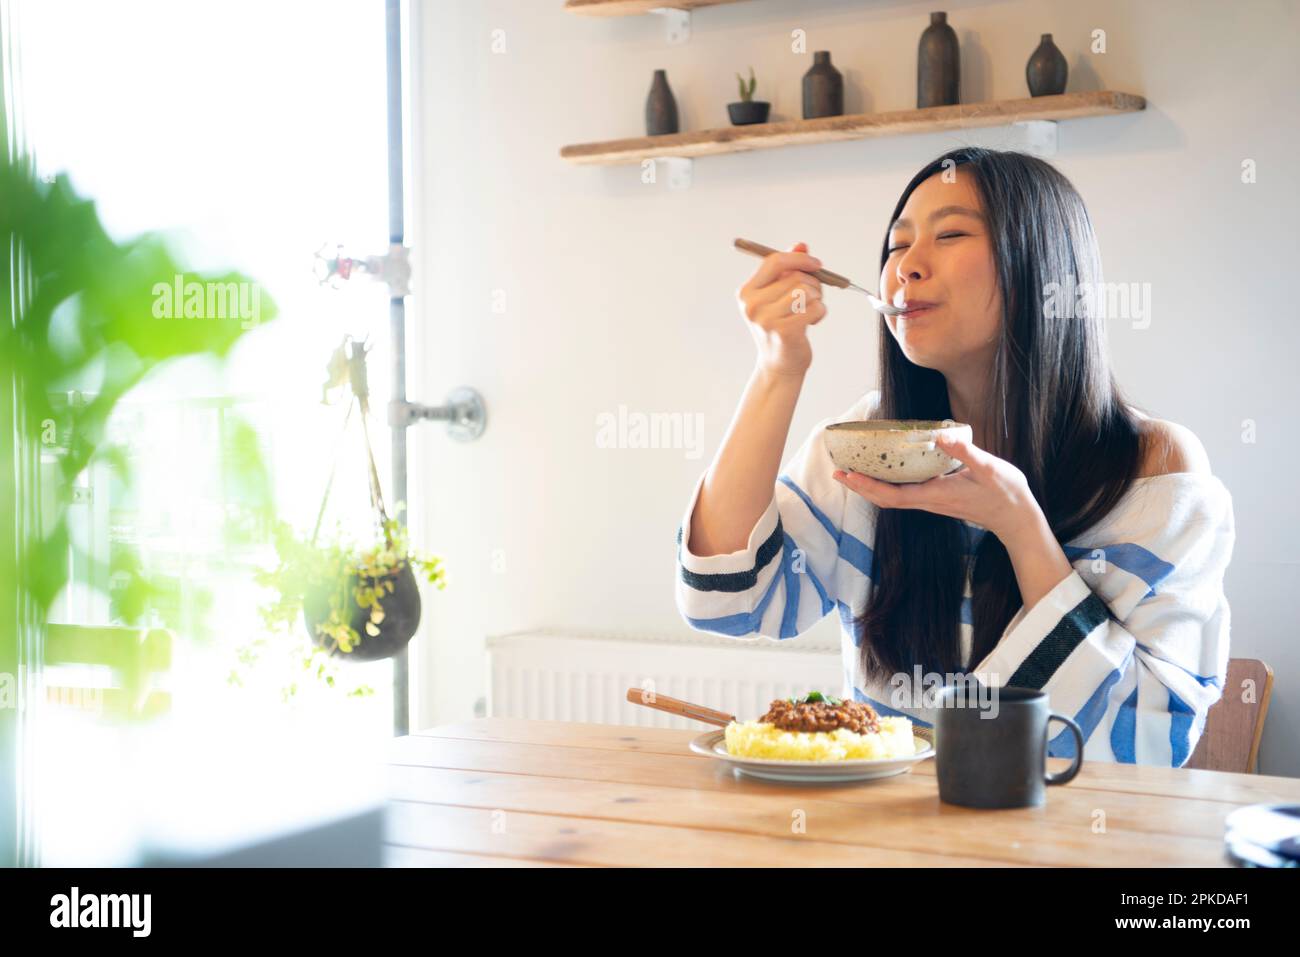 Woman eating food at the table Stock Photo